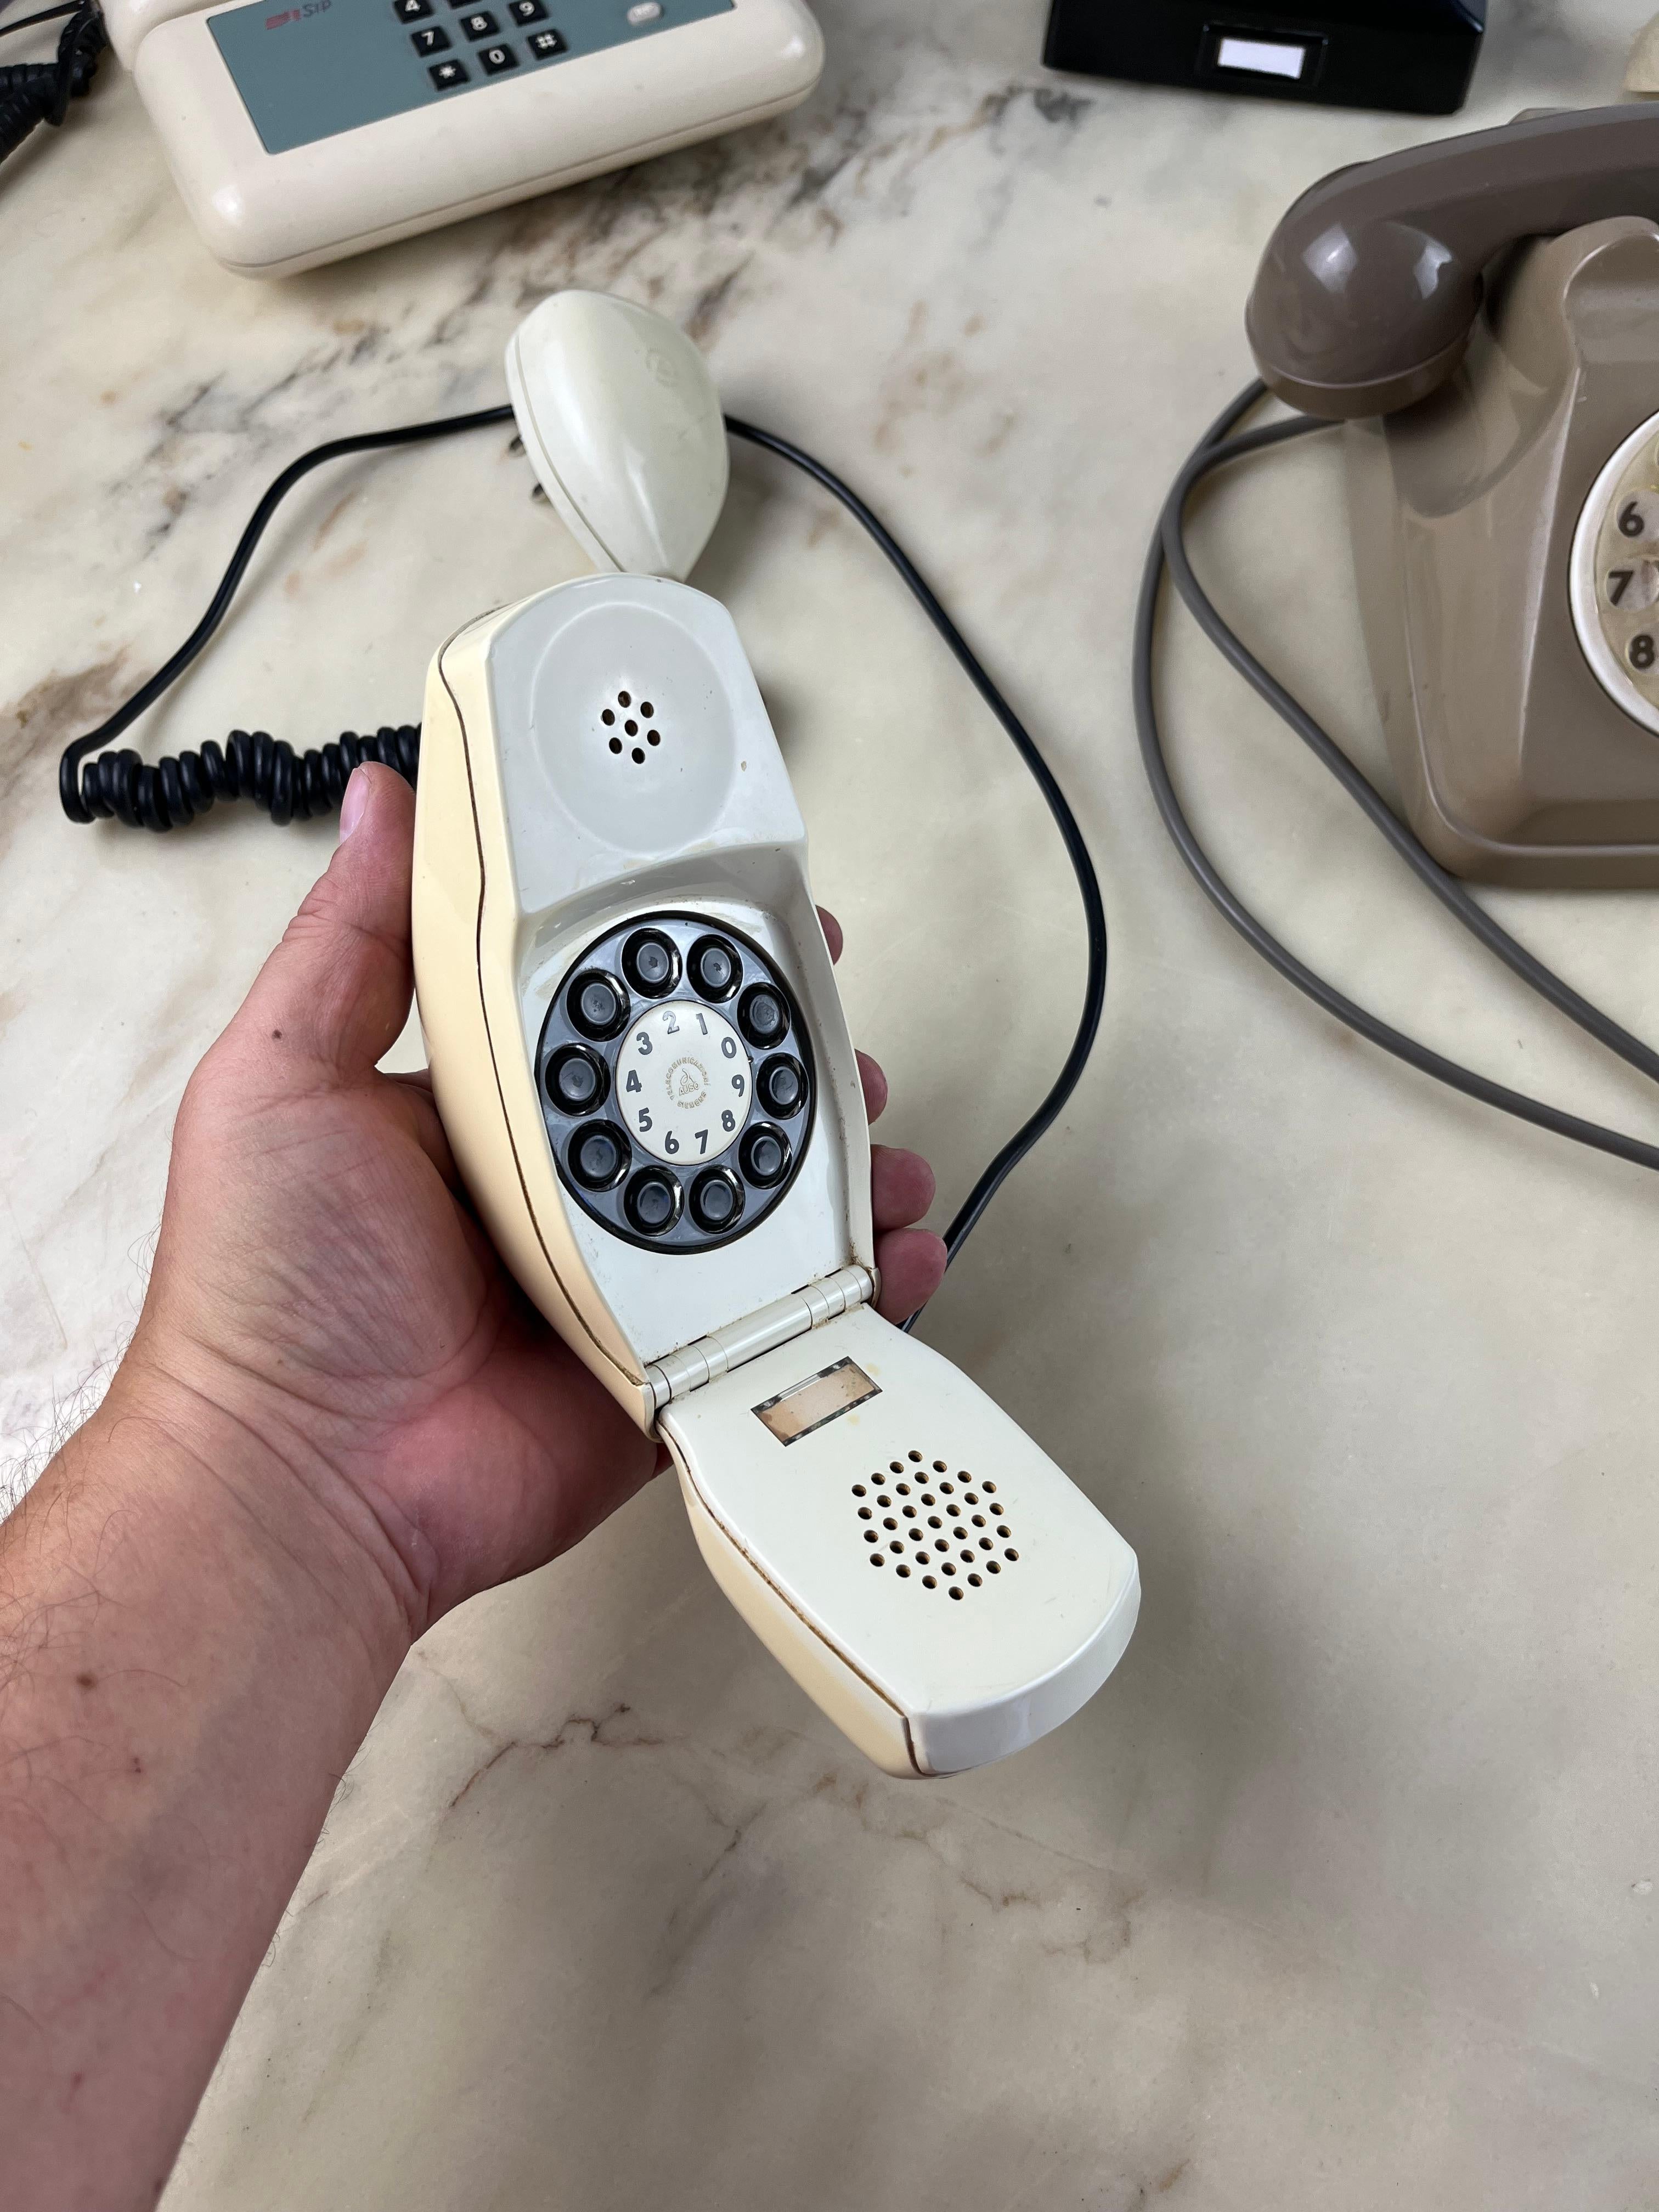 5 vintage Italian telephones. The oldest is the black one, dating back to the 1950s. Particular is the 